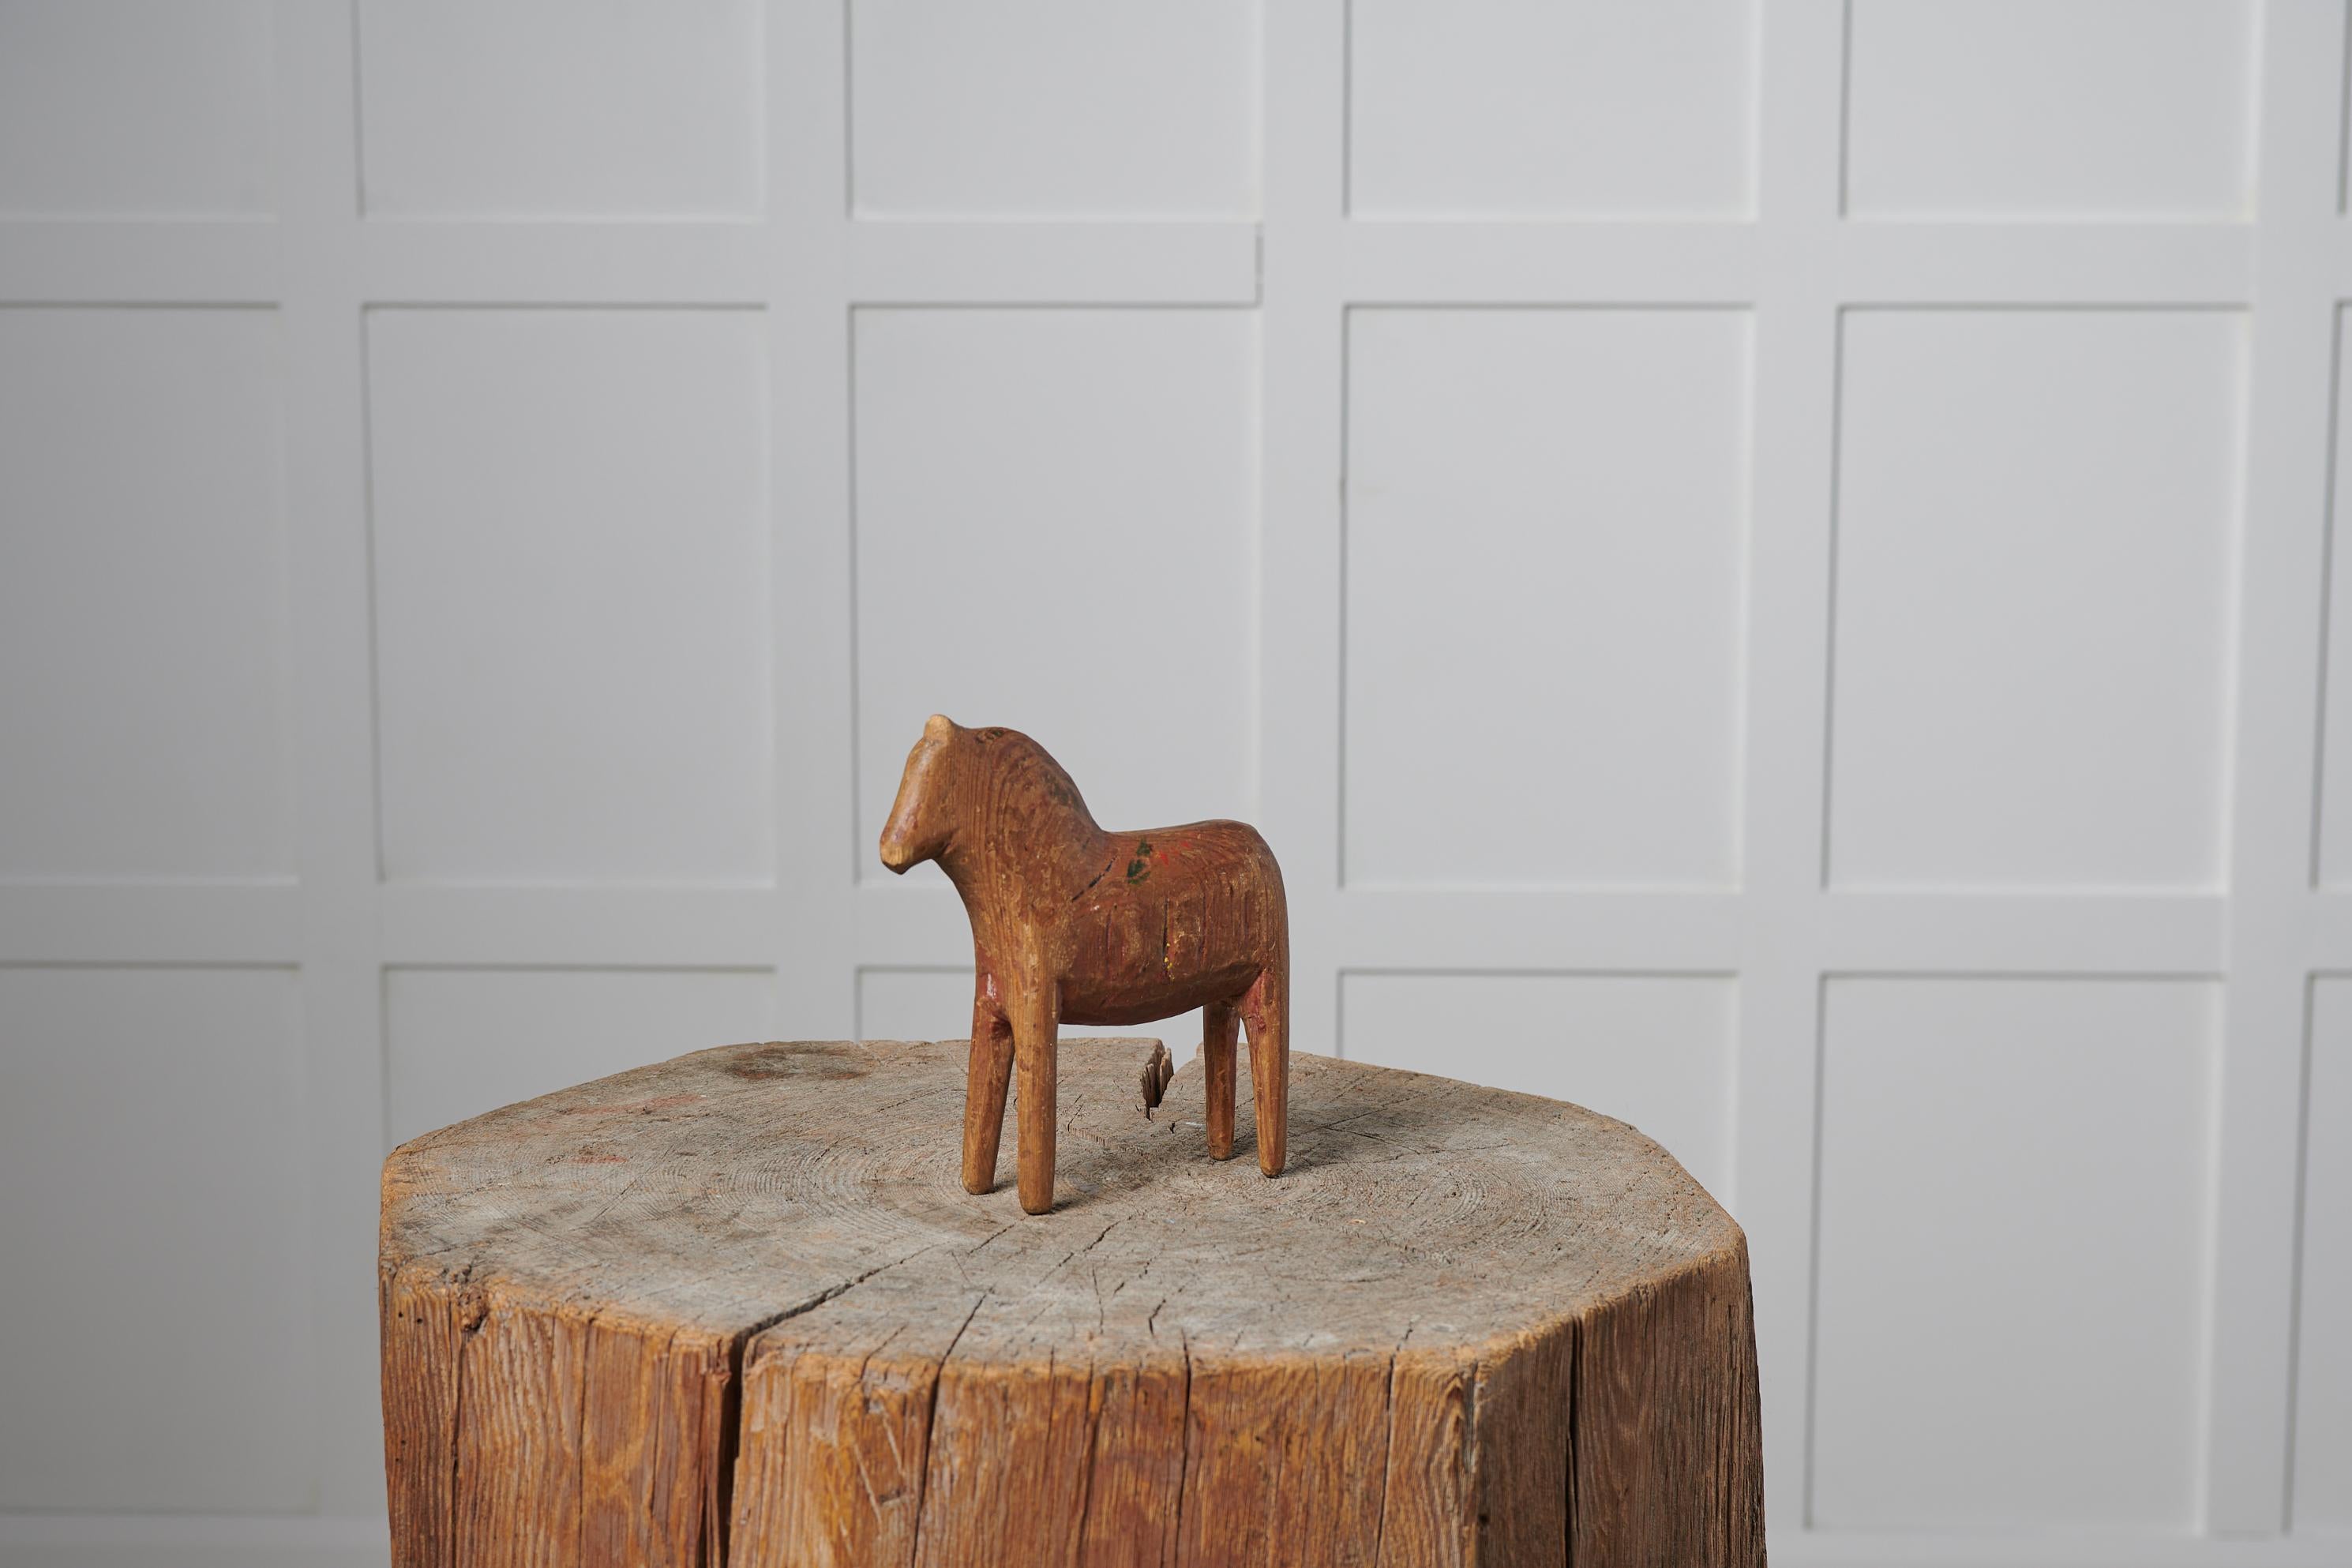 Antique hand-made toy horse in folk art from Sweden. The horse is from the late 1800s and in good vintage condition with traces and marks of use. The horse is made by hand in pine and has the warm patina of aged wood.